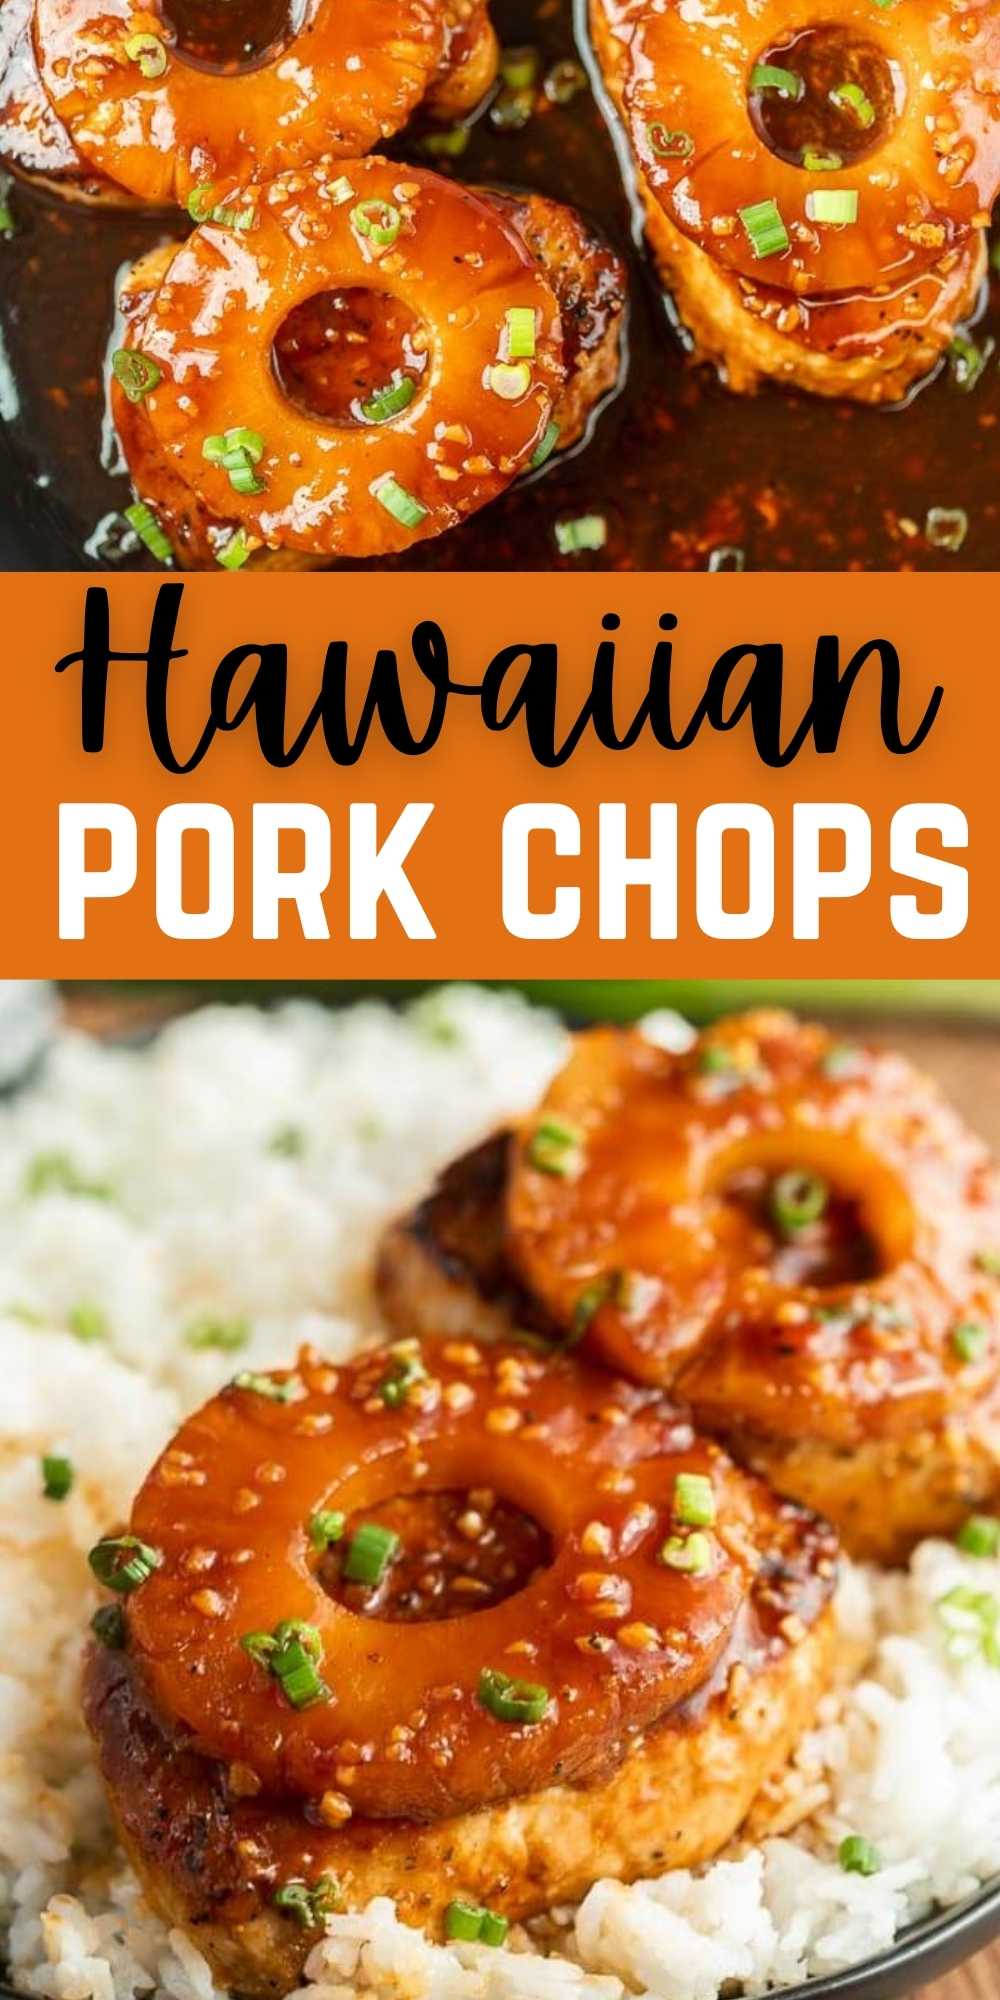 The sweet and tangy flavor of Hawaiian Pork Chops will be a hit. This skillet meal is simple to make and packed with flavor. This easy skillet recipe is simple to make and packed with tons of flavor too! #eatingonadime #porkrecipes #skilletrecipes #hawaiianrecipes 